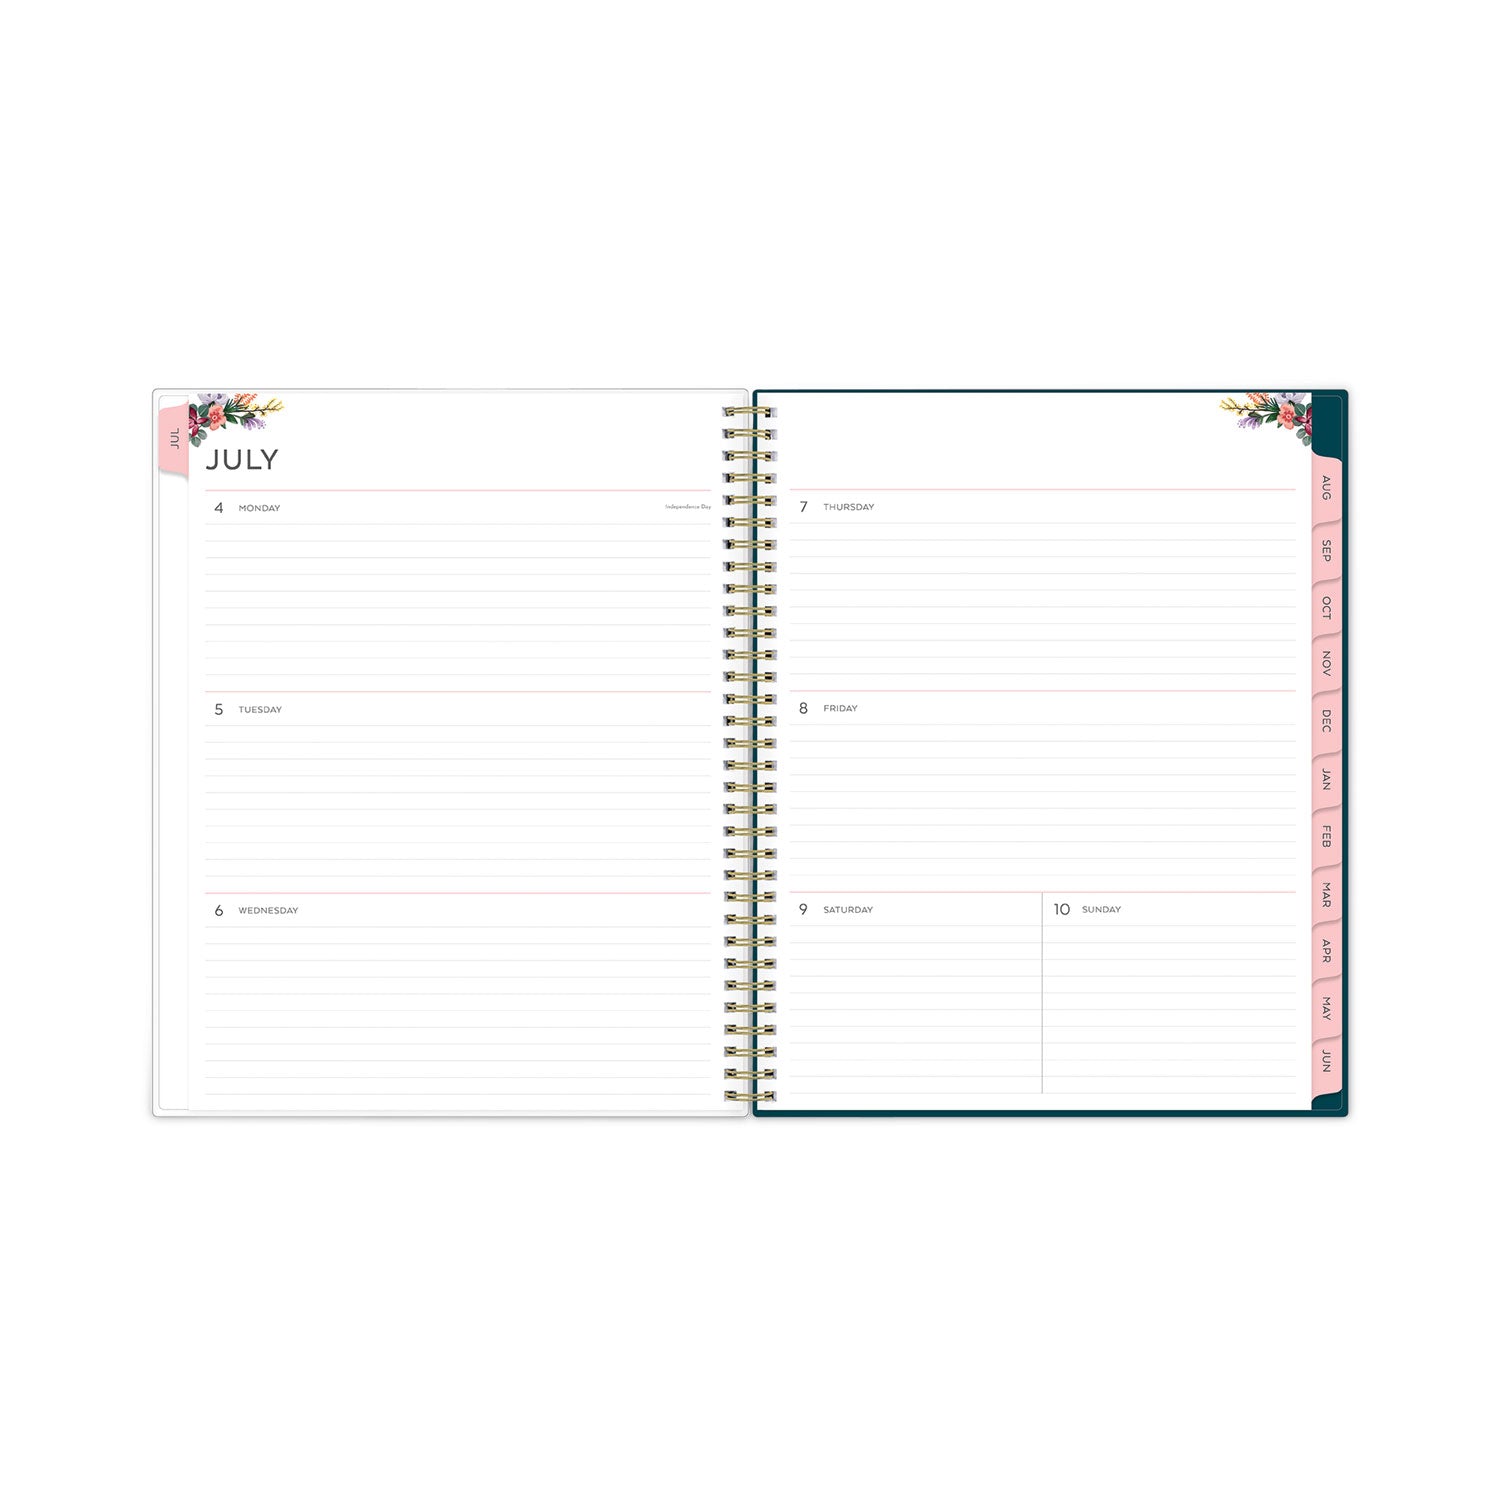 greta-academic-year-weekly-monthly-planner-greta-floral-artwork-115-x-8-green-cover-12-month-july-june-2022-2023_bls136479 - 2